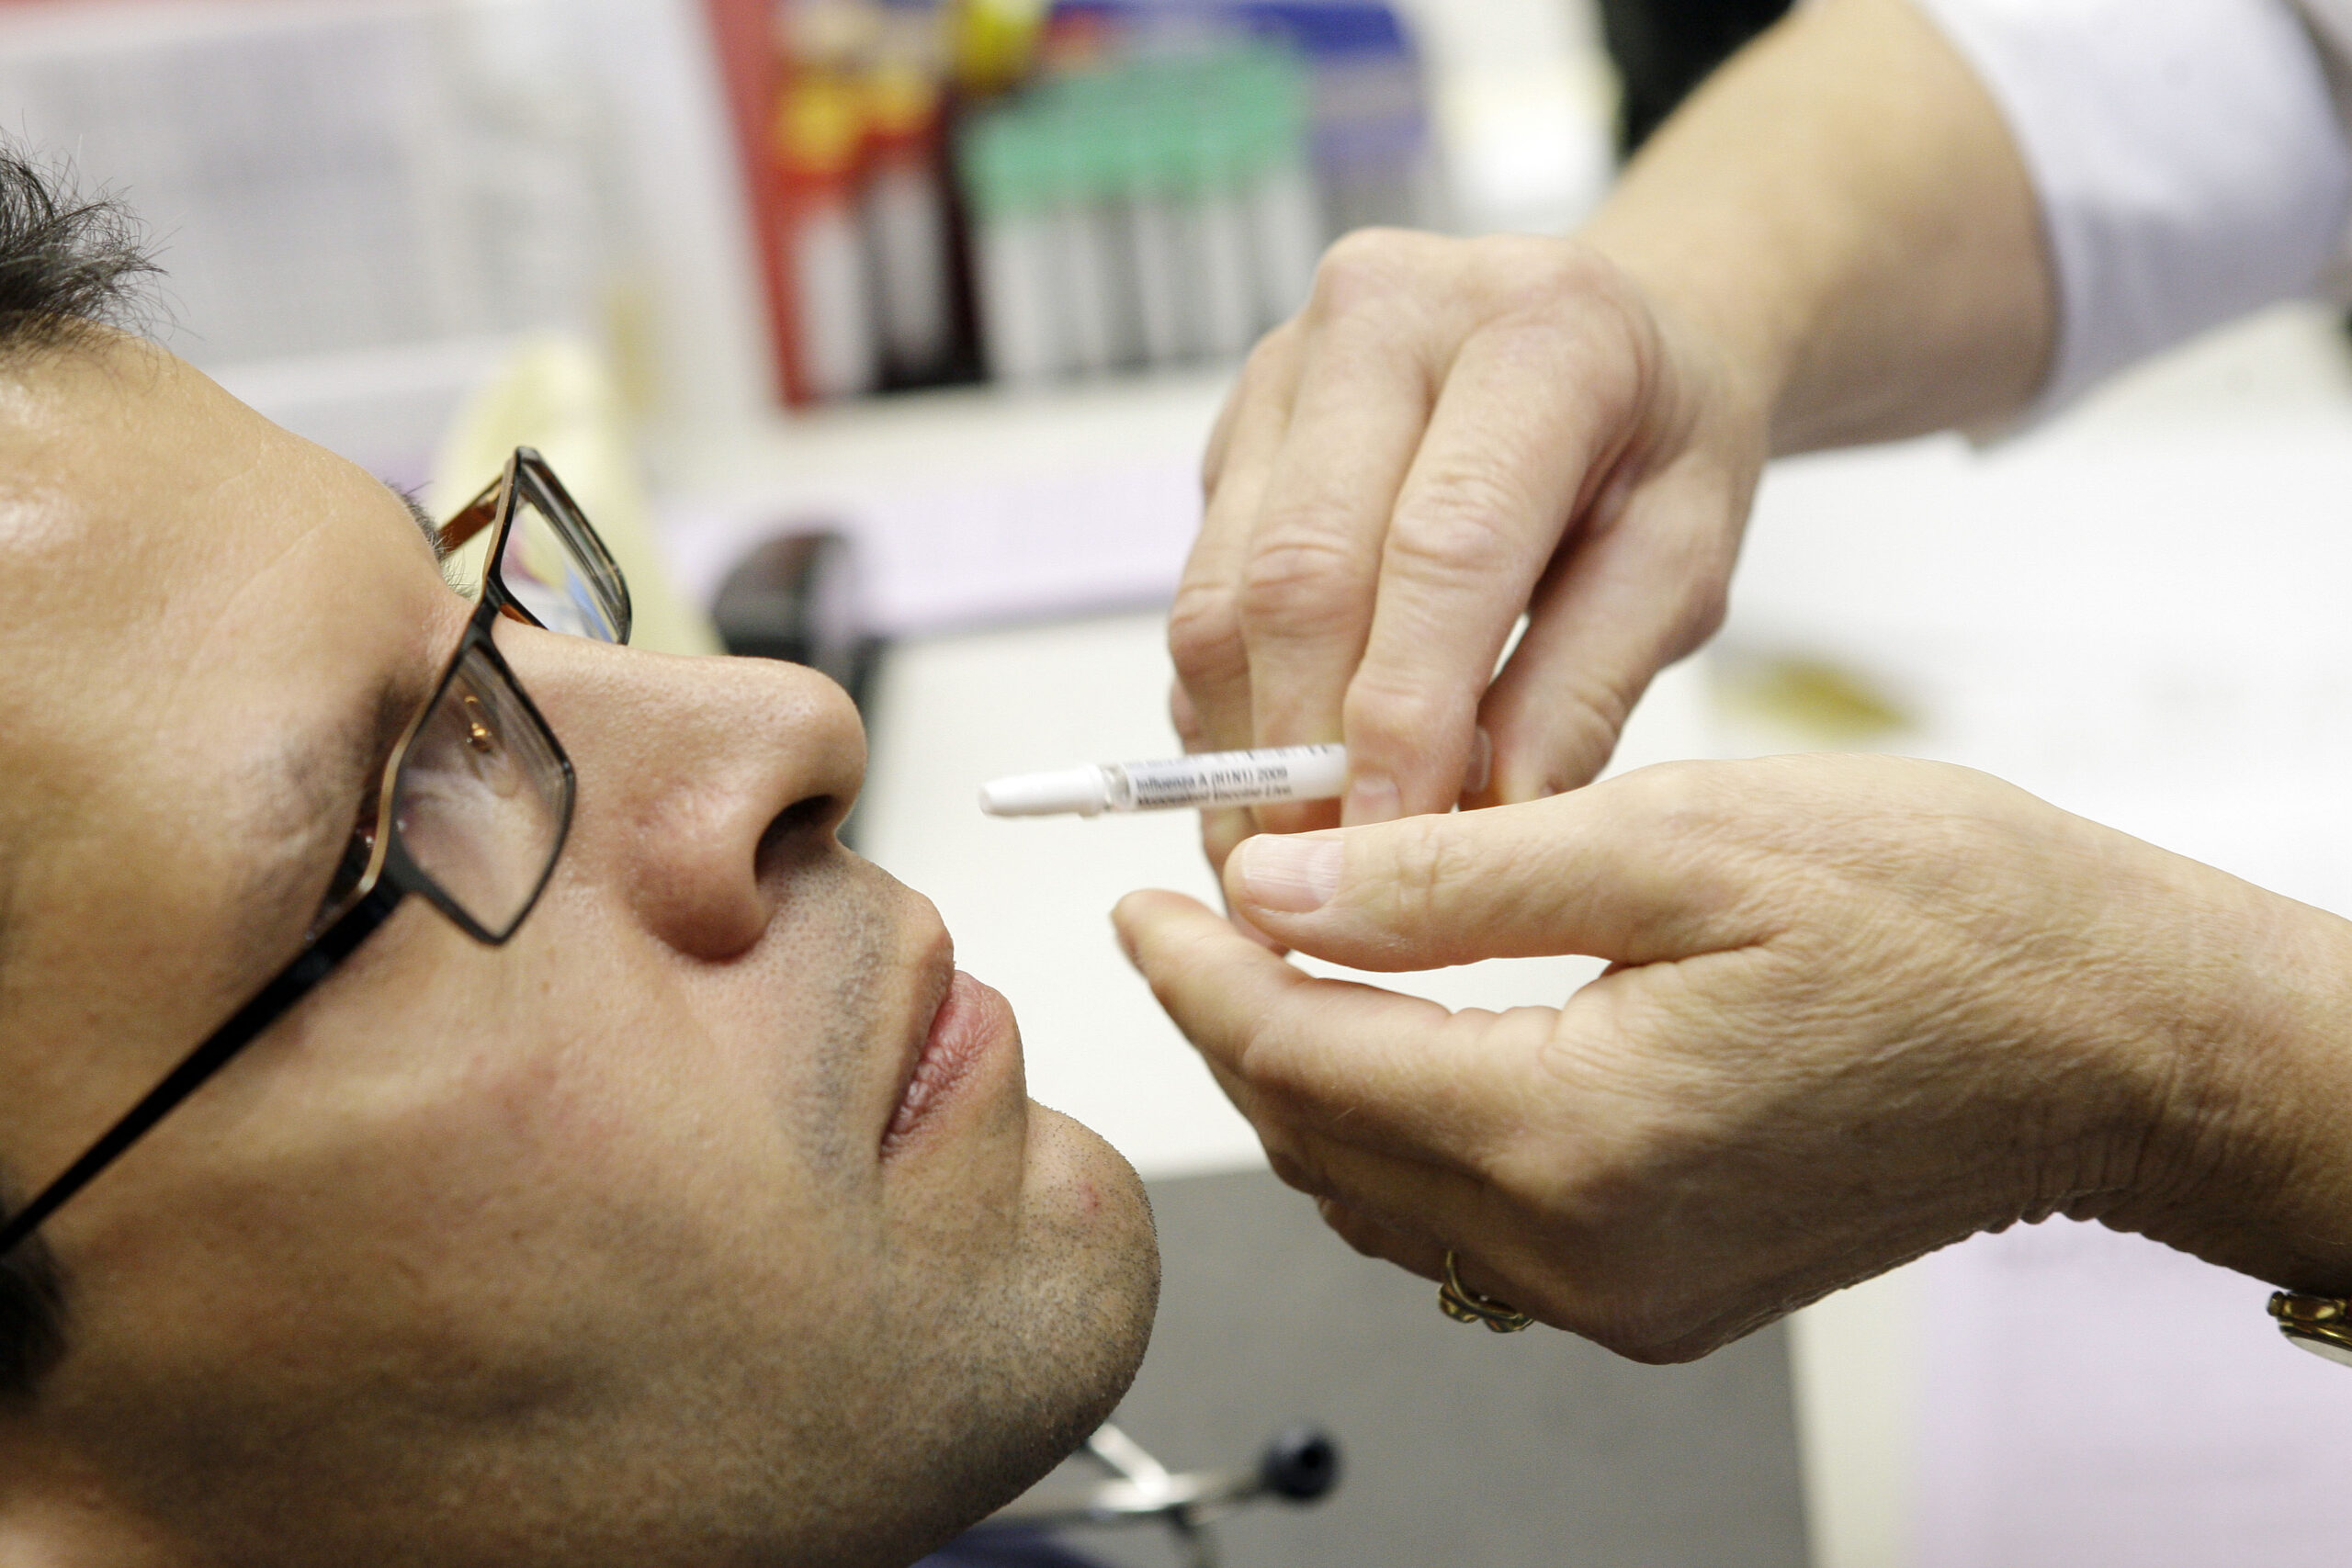 Intranasal Vaccine Receives Nod for Phase 2/3 Trials